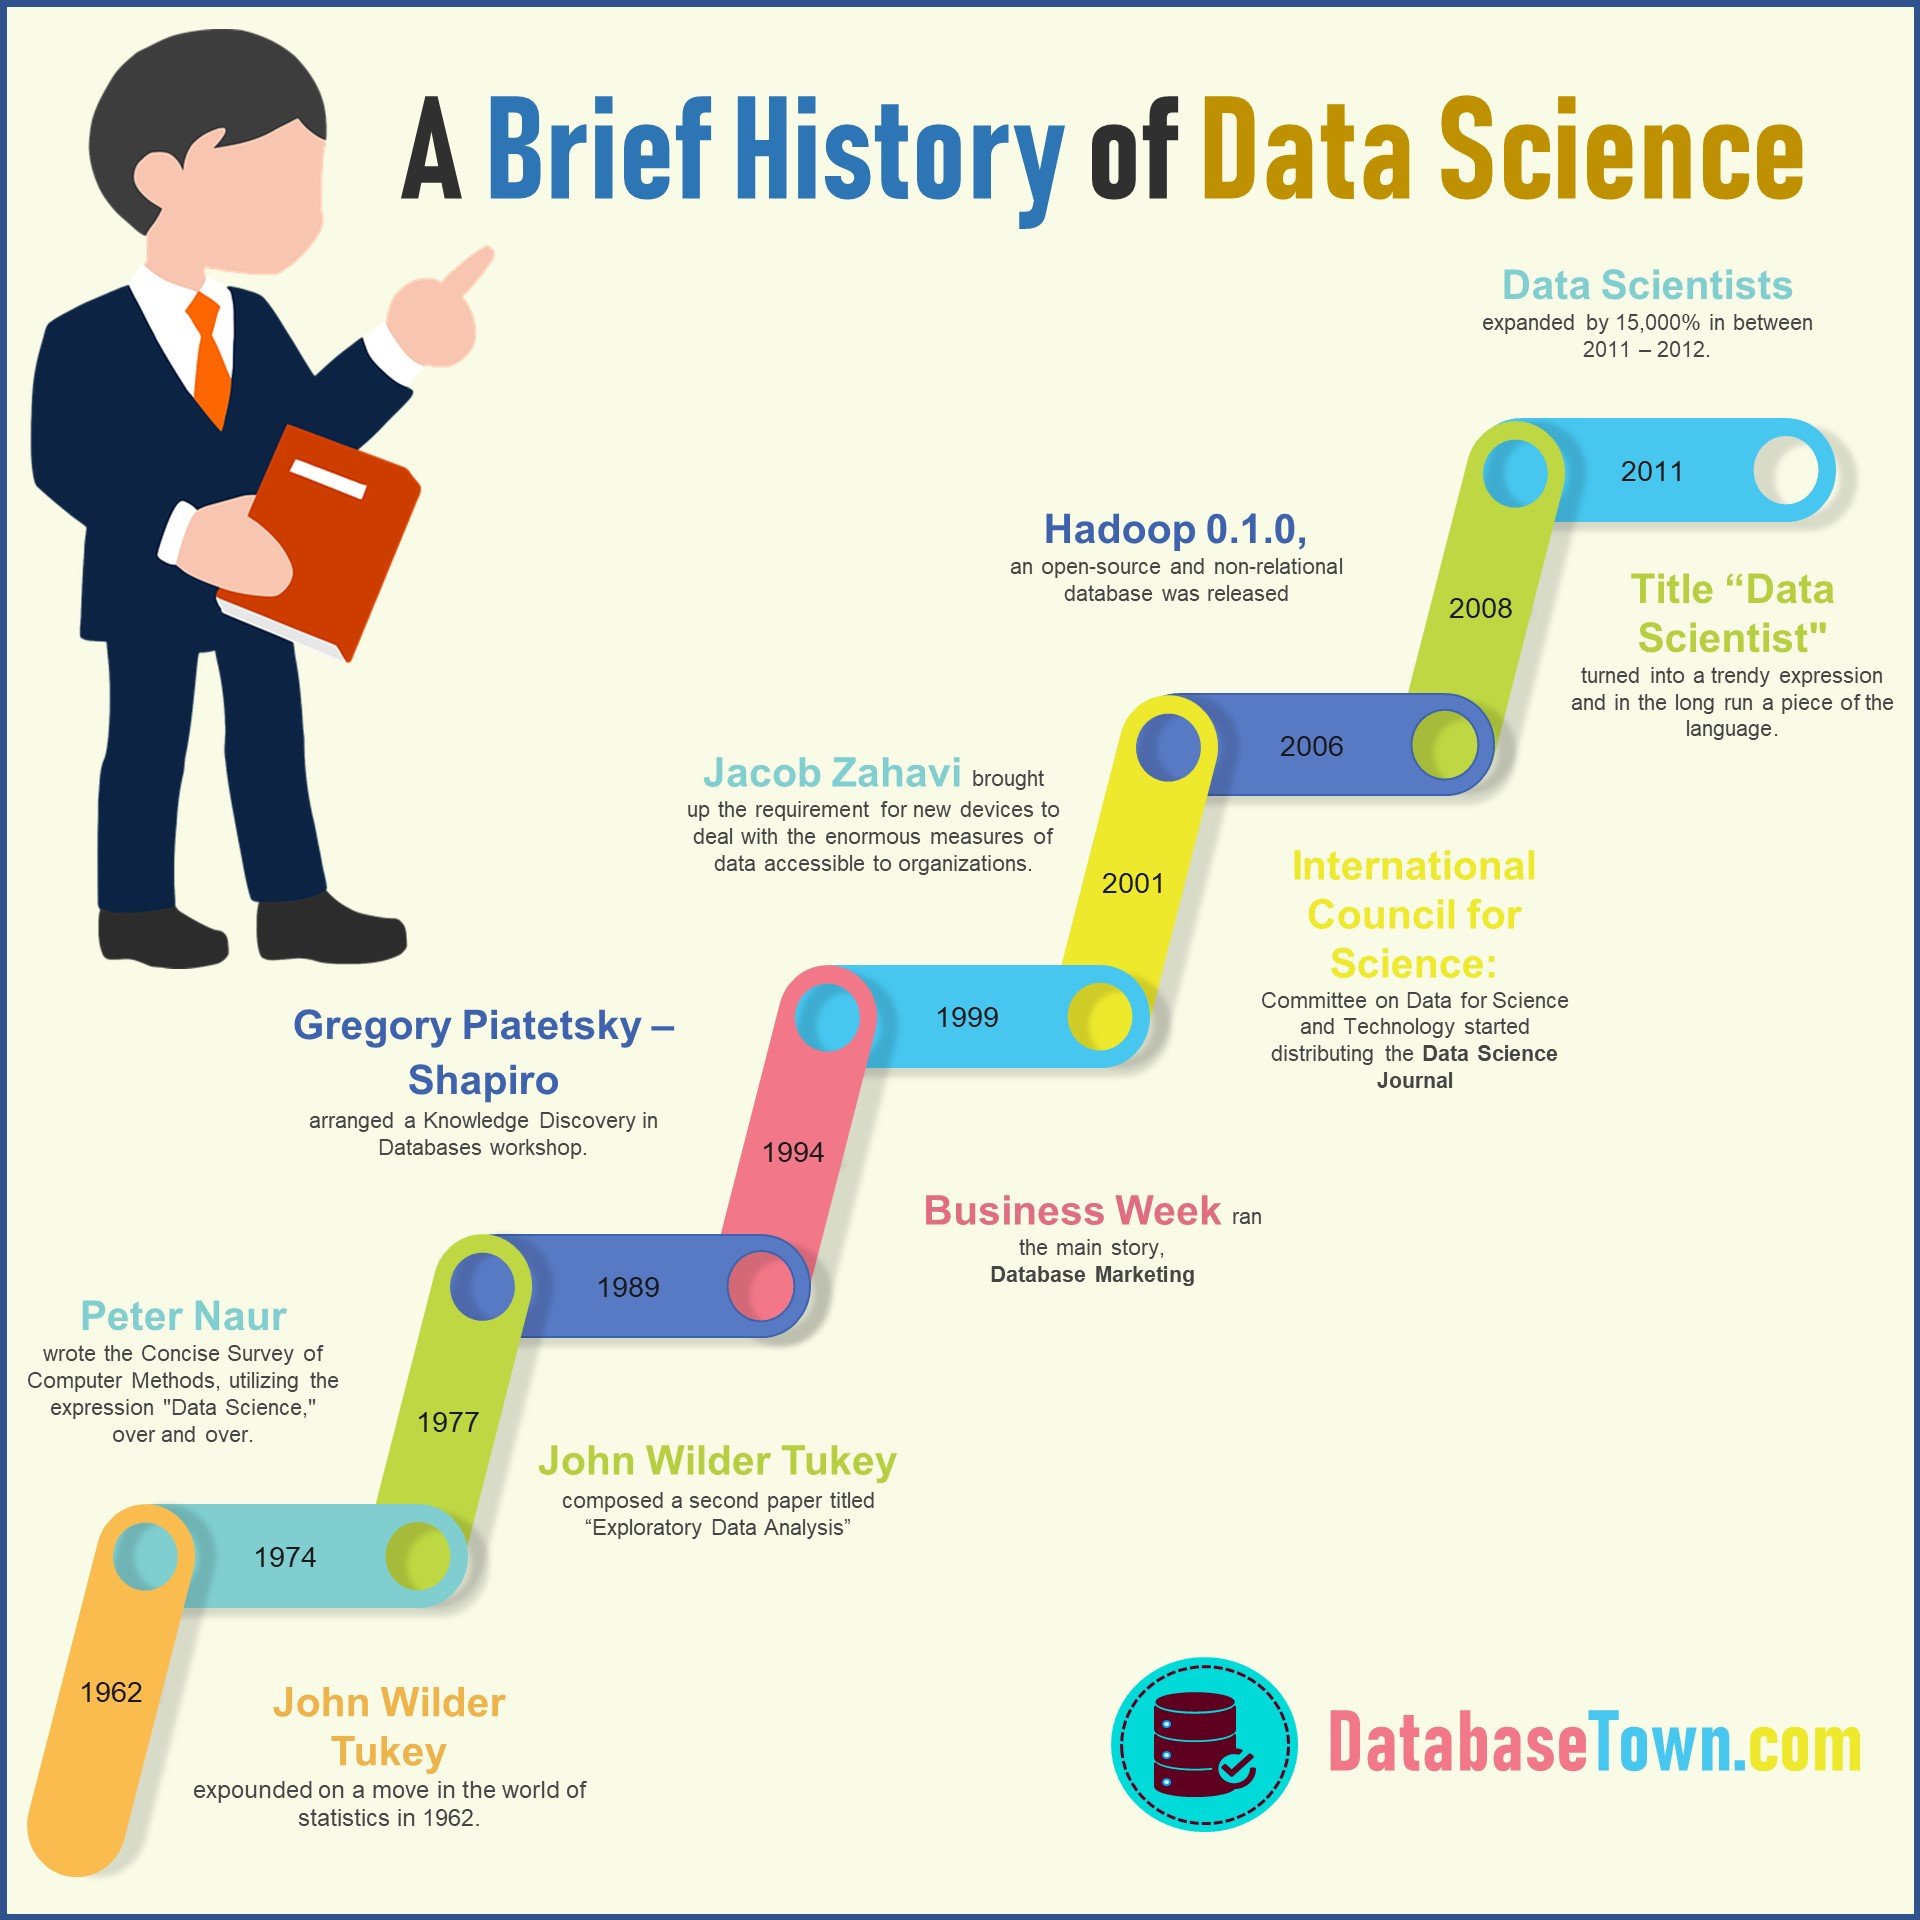 A Brief History of Data Science infographic